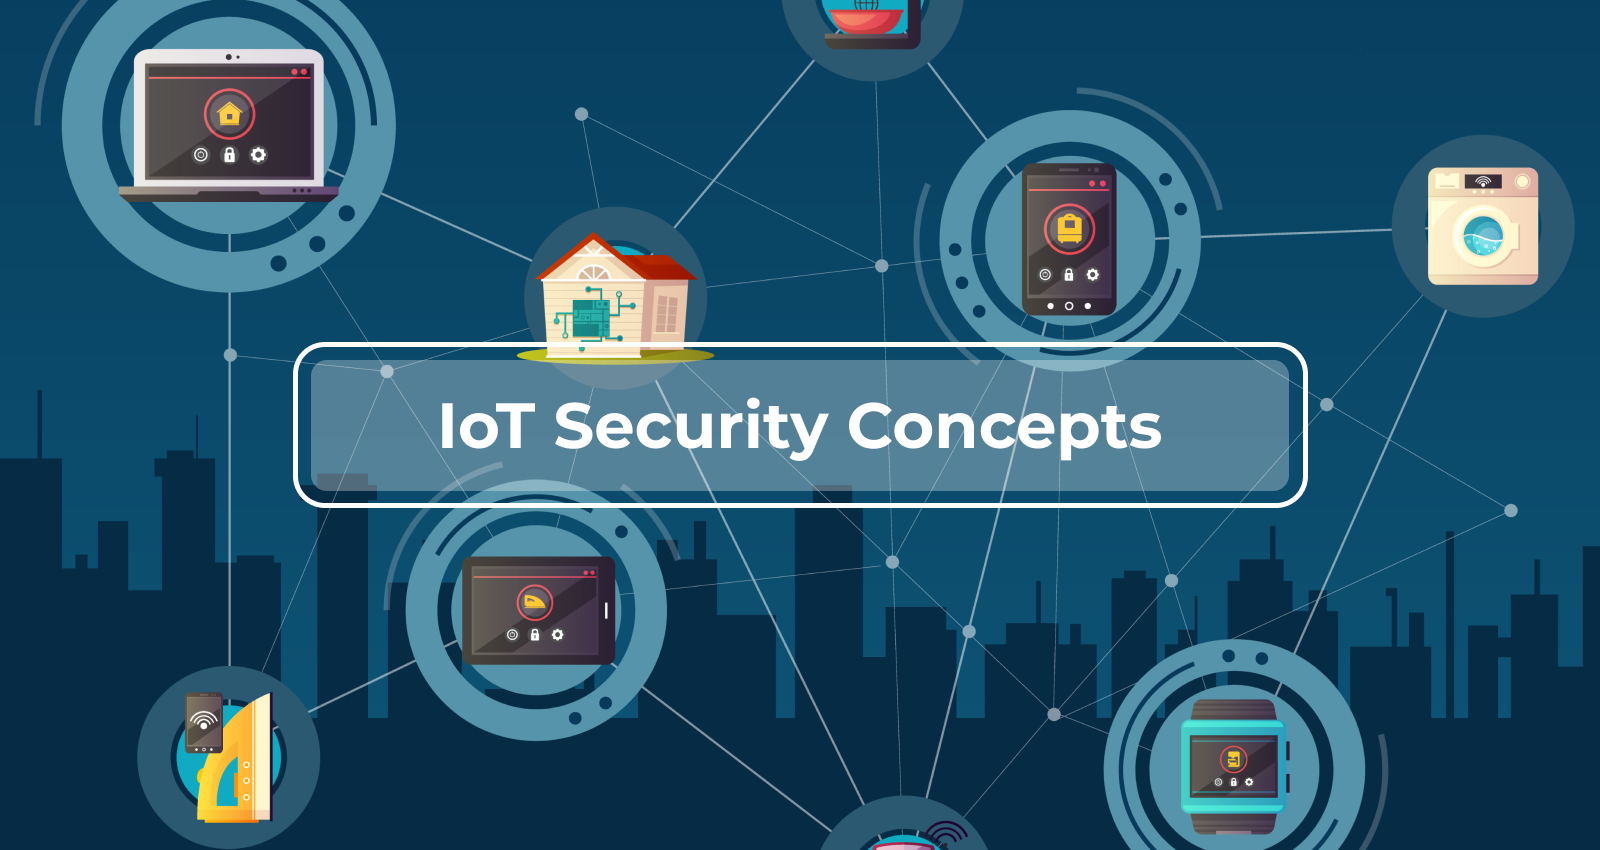 IoT, Internet of Things, IoT device Security, IoT Security Best Practices, IoT Devices, IoT Device security Concepts